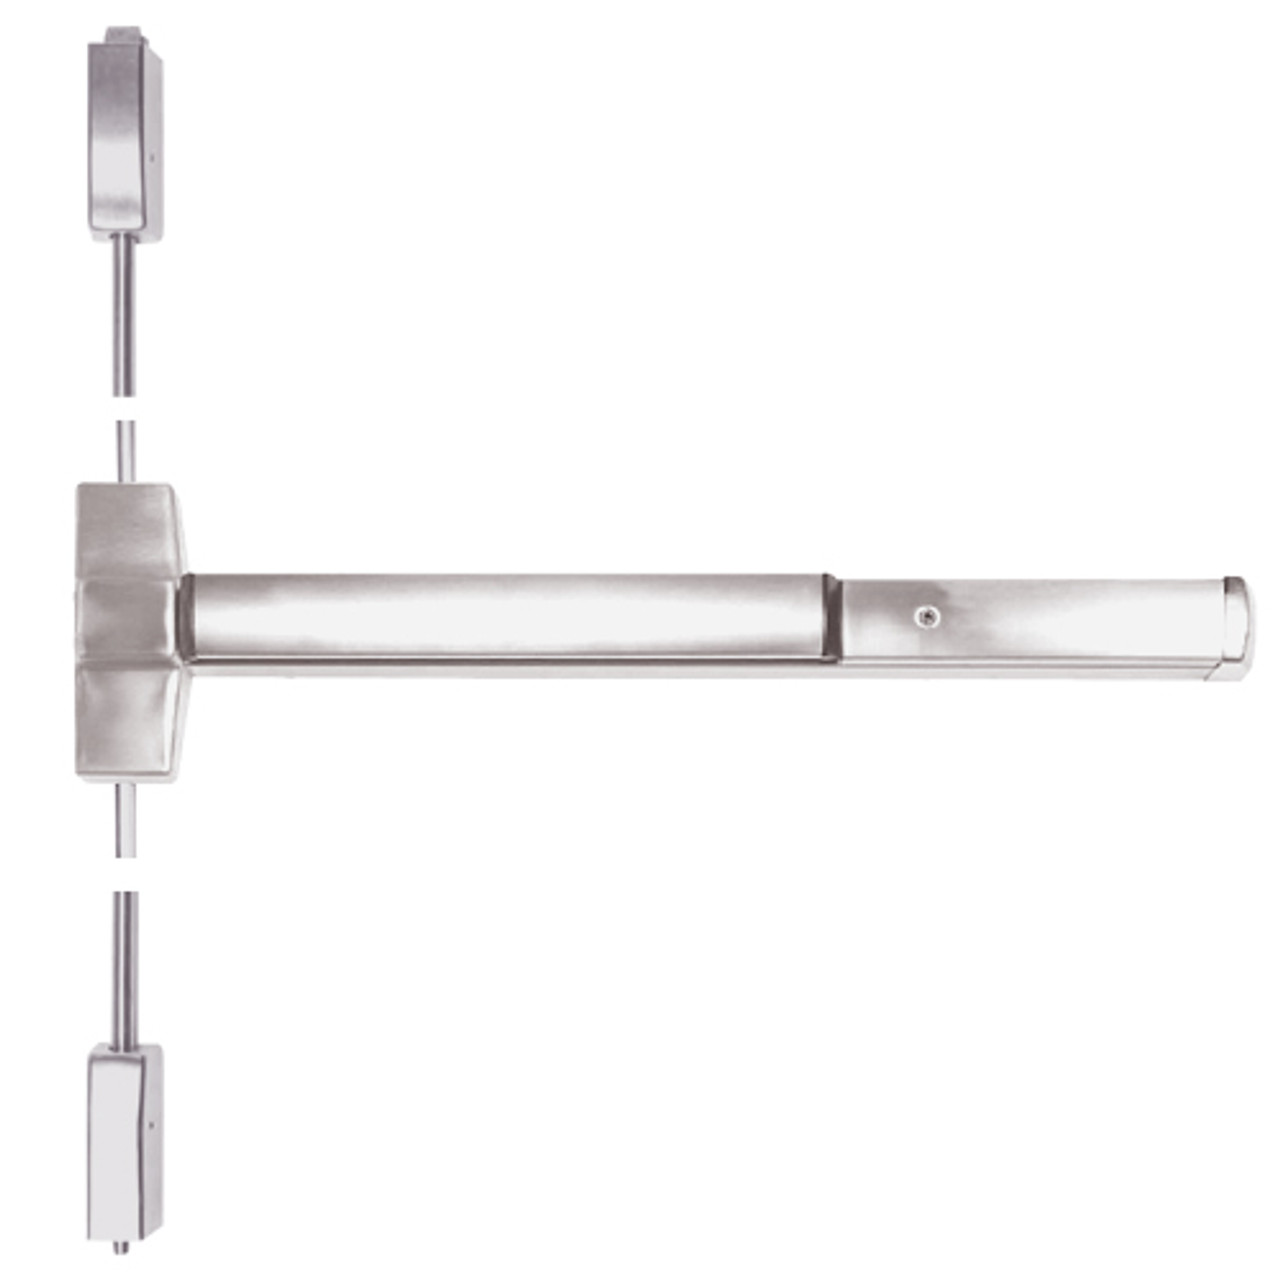 ED5400-630-MELR Corbin ED5400 Series Non Fire Rated Vertical Rod Exit Device with Motor Latch Retraction in Satin Stainless Steel Finish